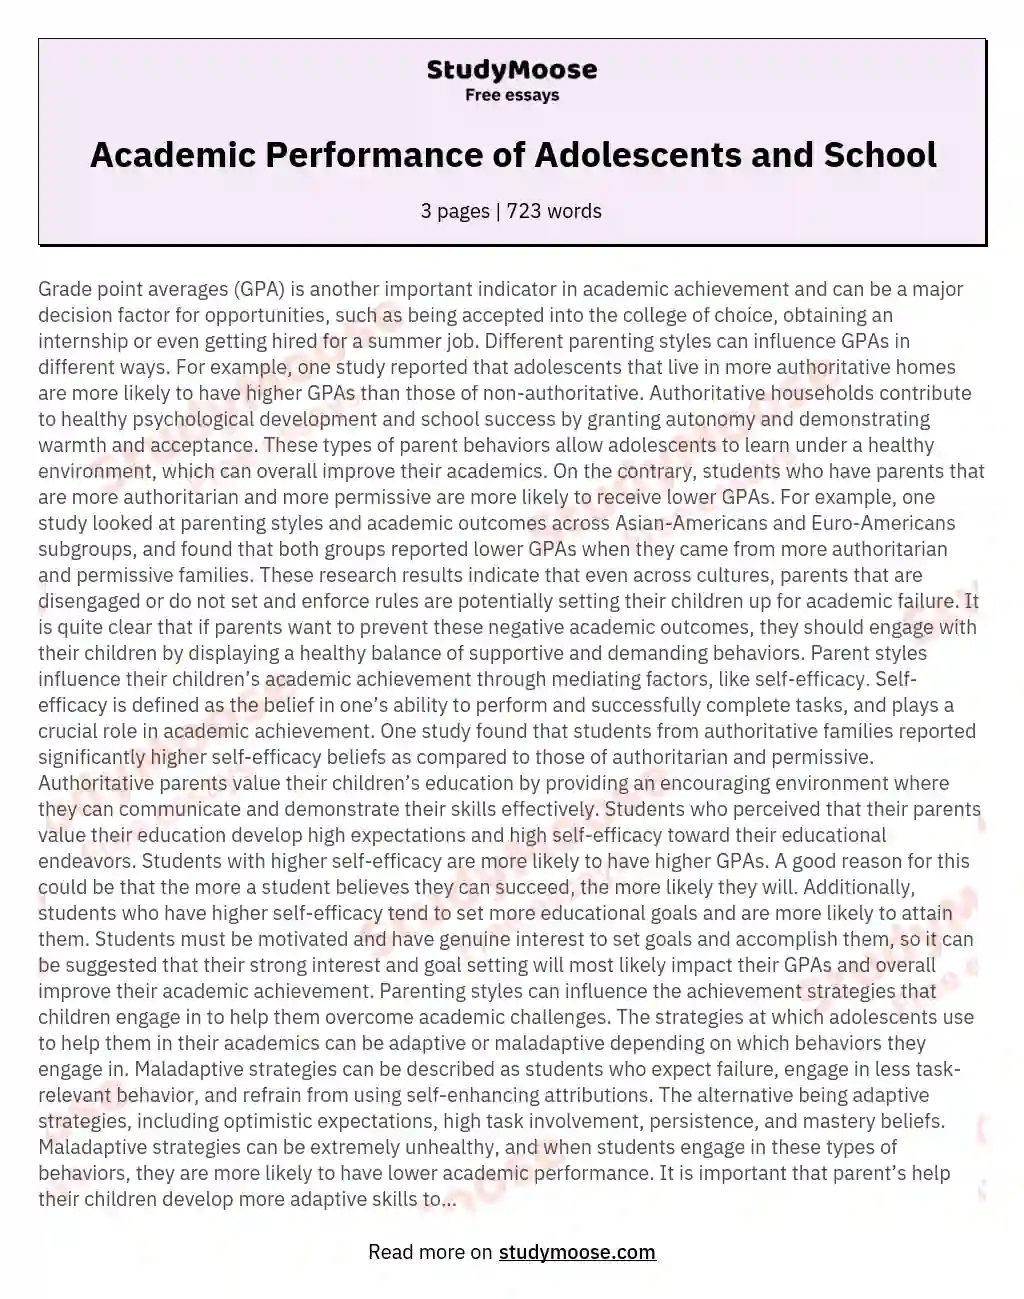 Academic Performance of Adolescents and School essay